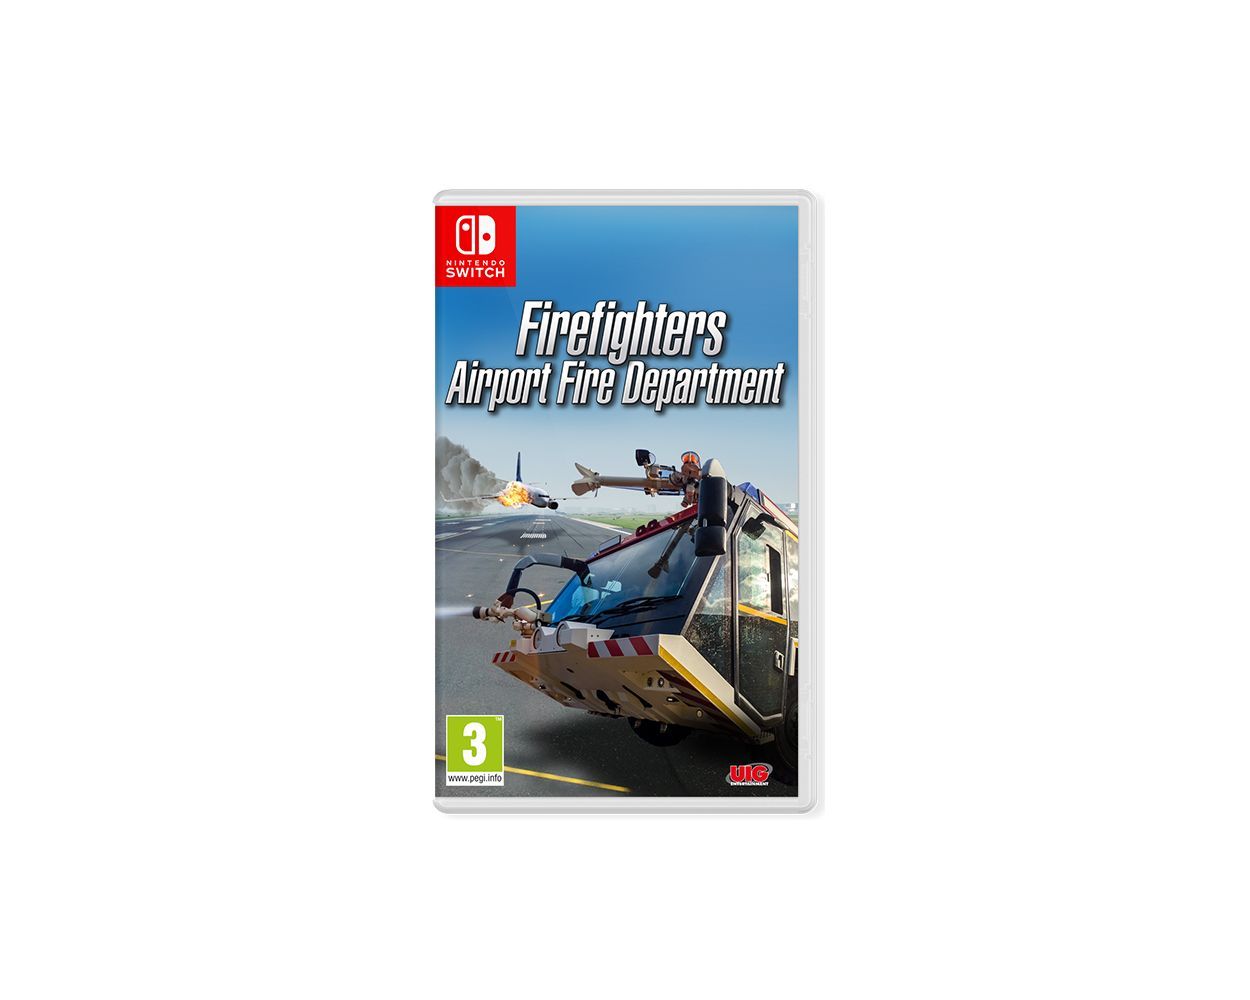 FIREFIGHTERS AIRPORT FIRE DEPARTMENT NINTENDO SWITCH